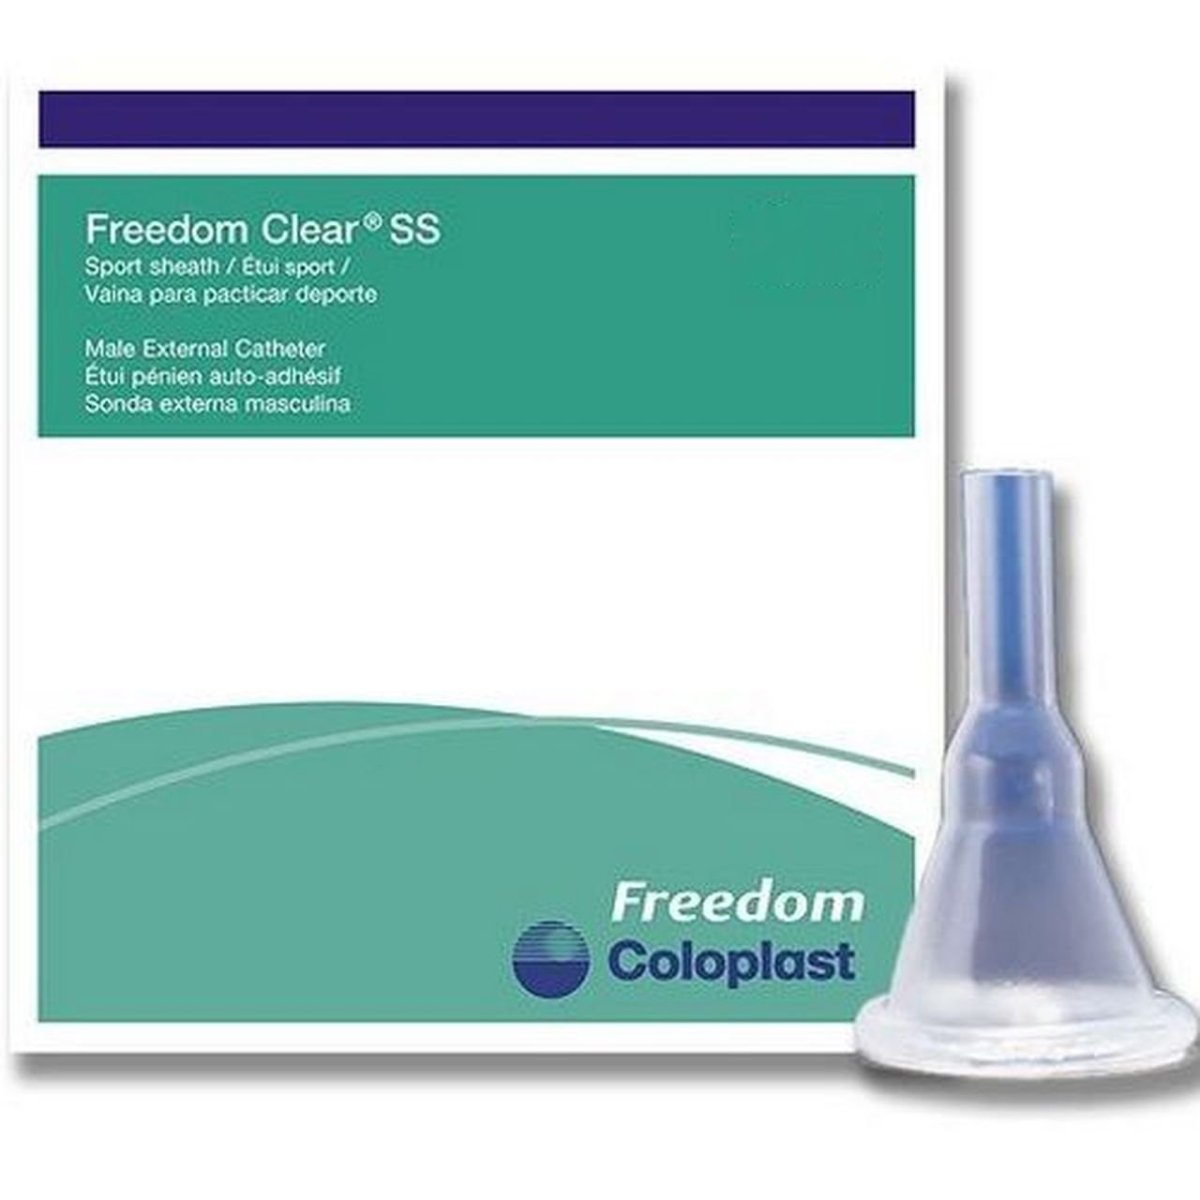 Coloplast Freedom Clear Ss Male External Catheter - 461689_EA - 1